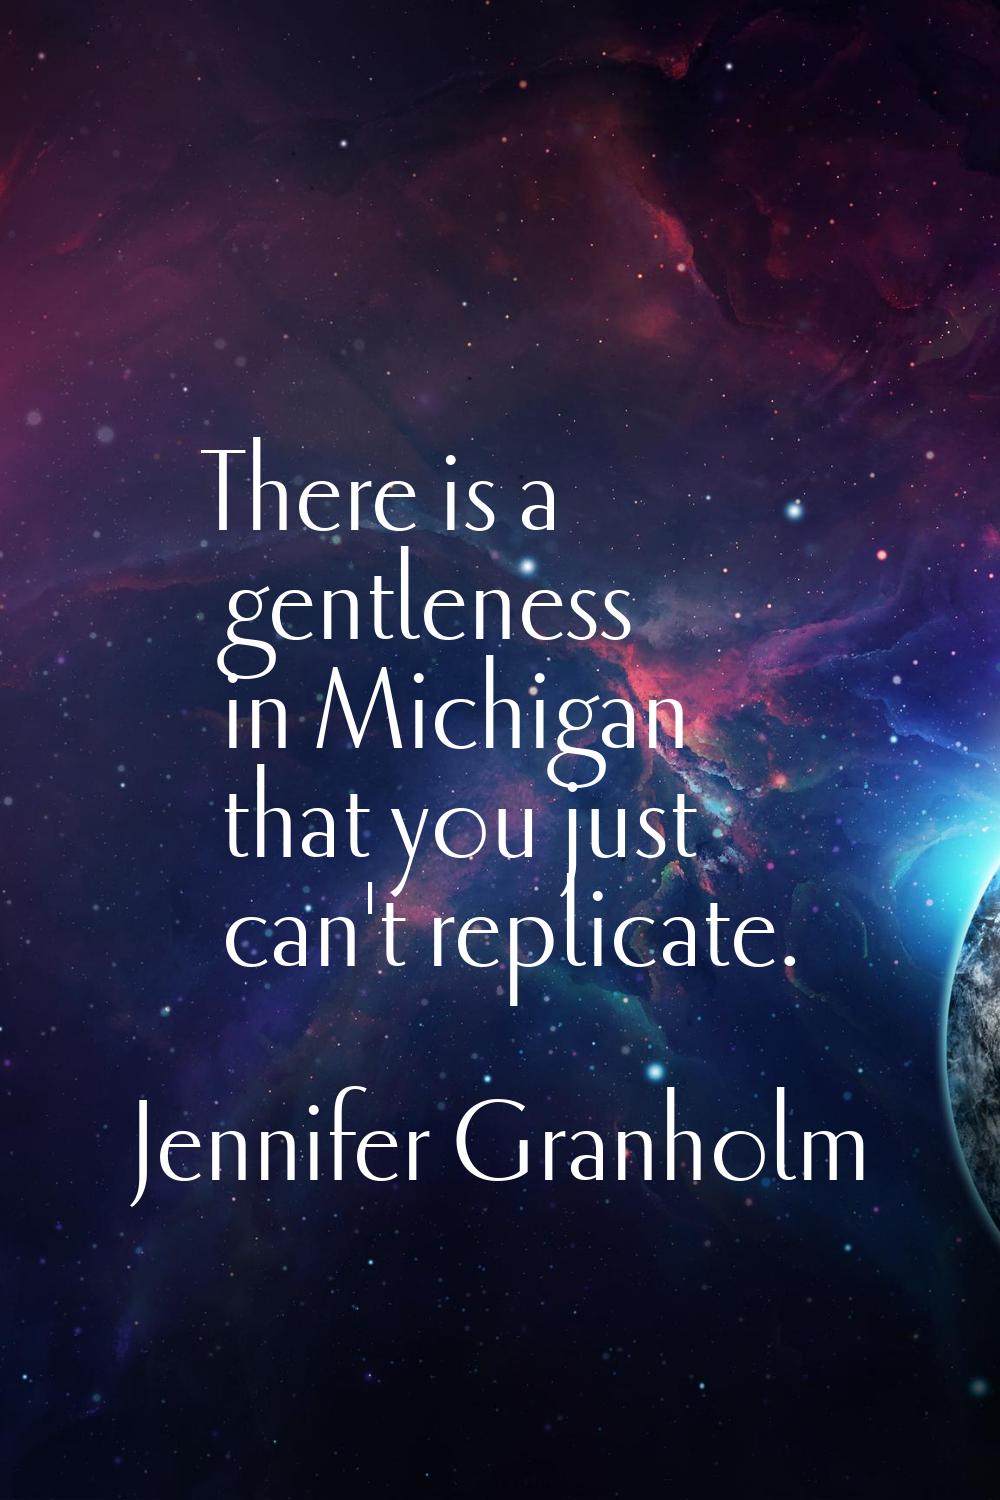 There is a gentleness in Michigan that you just can't replicate.